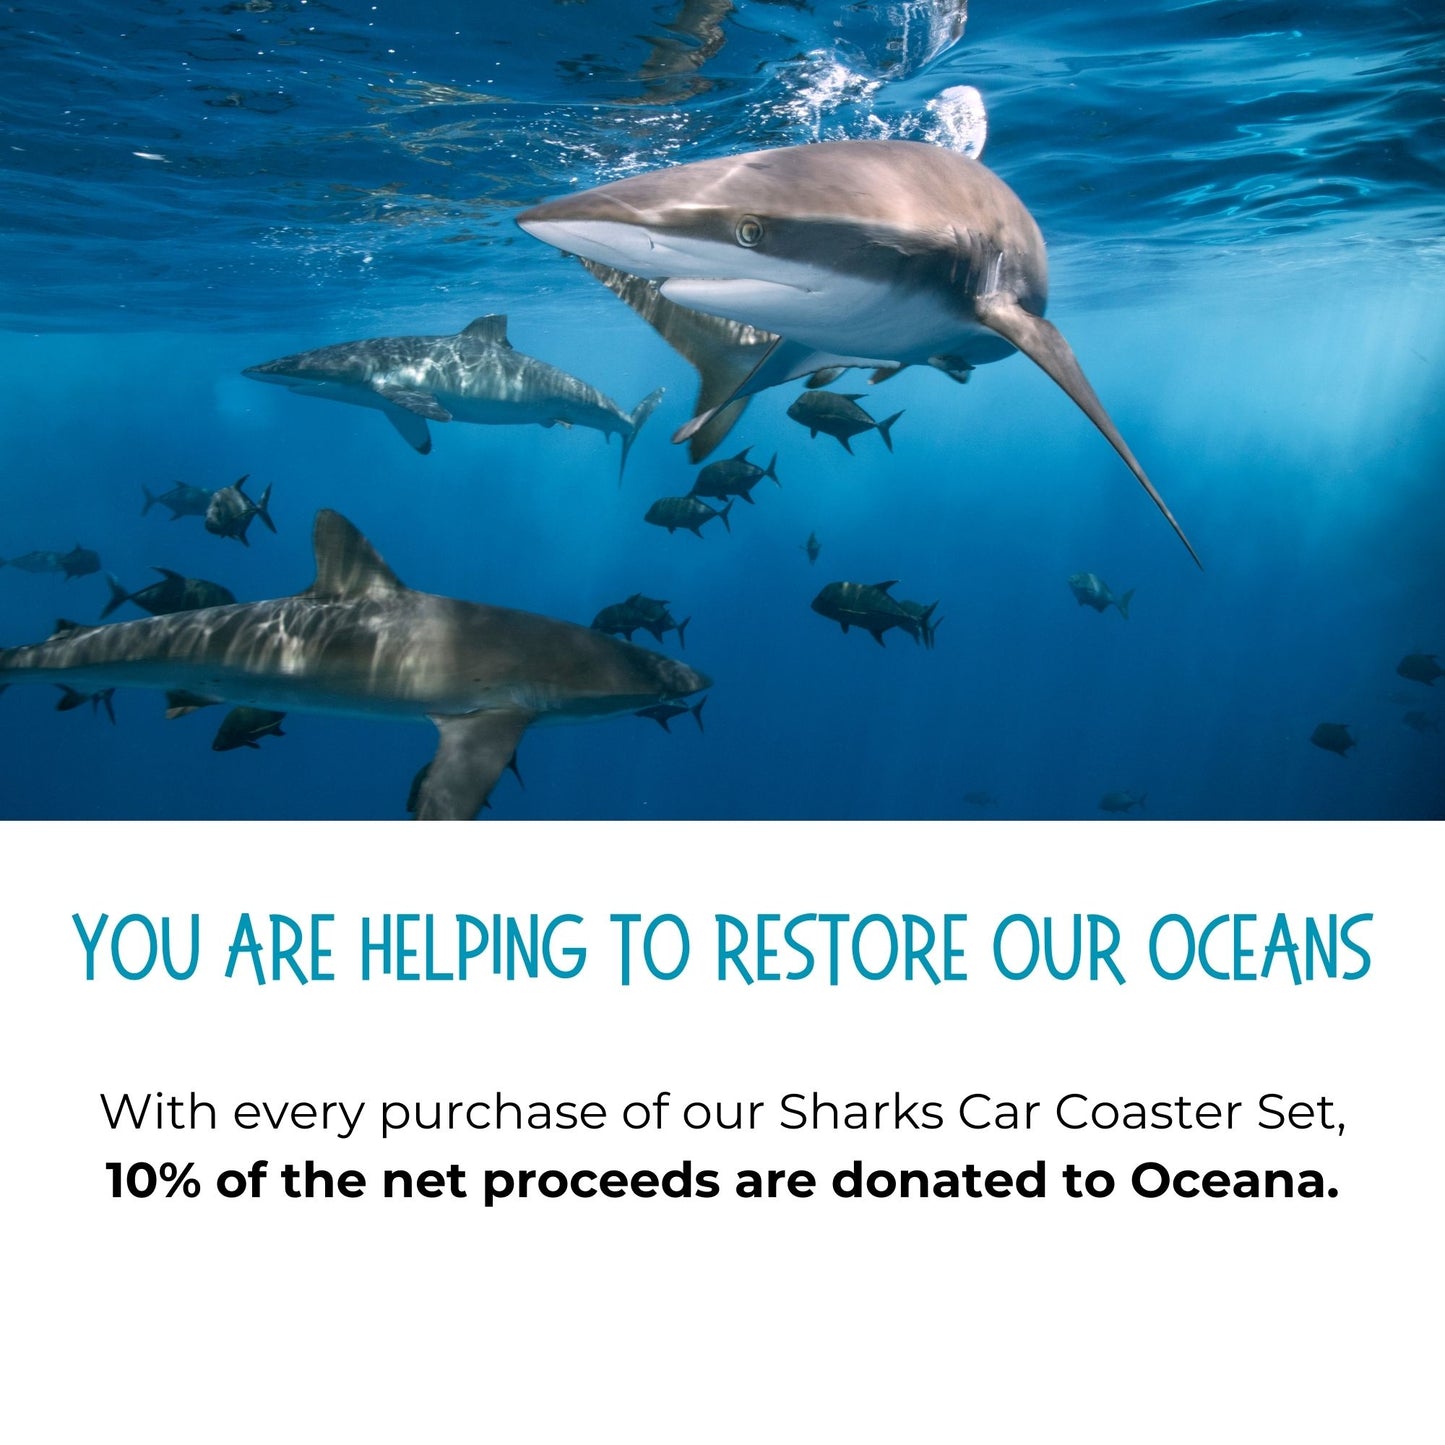 Sharks Car Coaster Set - Connected Clothing Company - 10% donated to ocean conservation